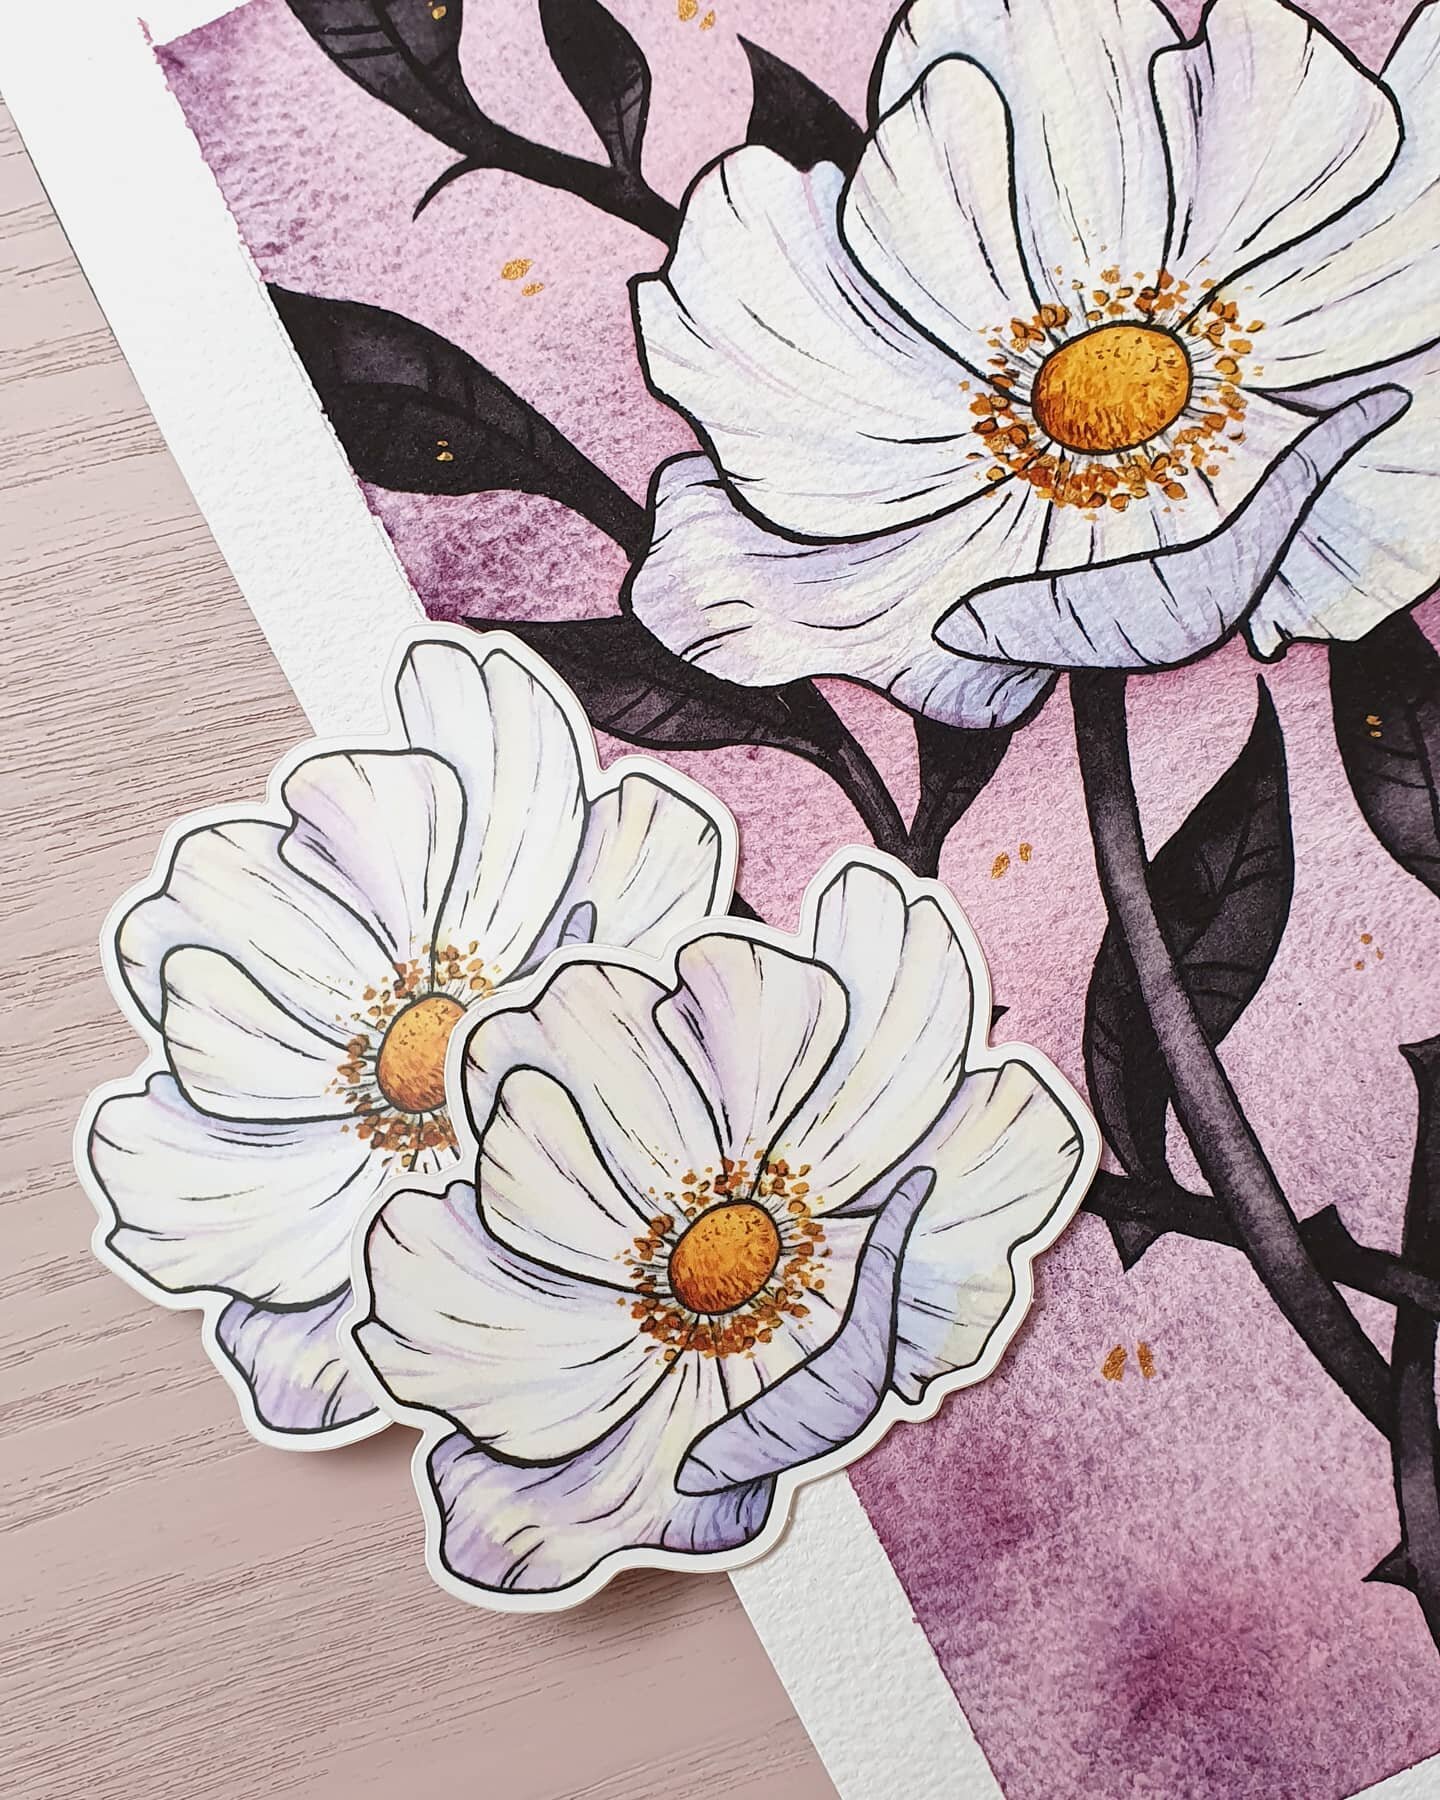 When I finished this painting I just knew that I needed to make the flower into a sticker 🌸😊

#watercolorartist #stickerapp #stickerart #floralart